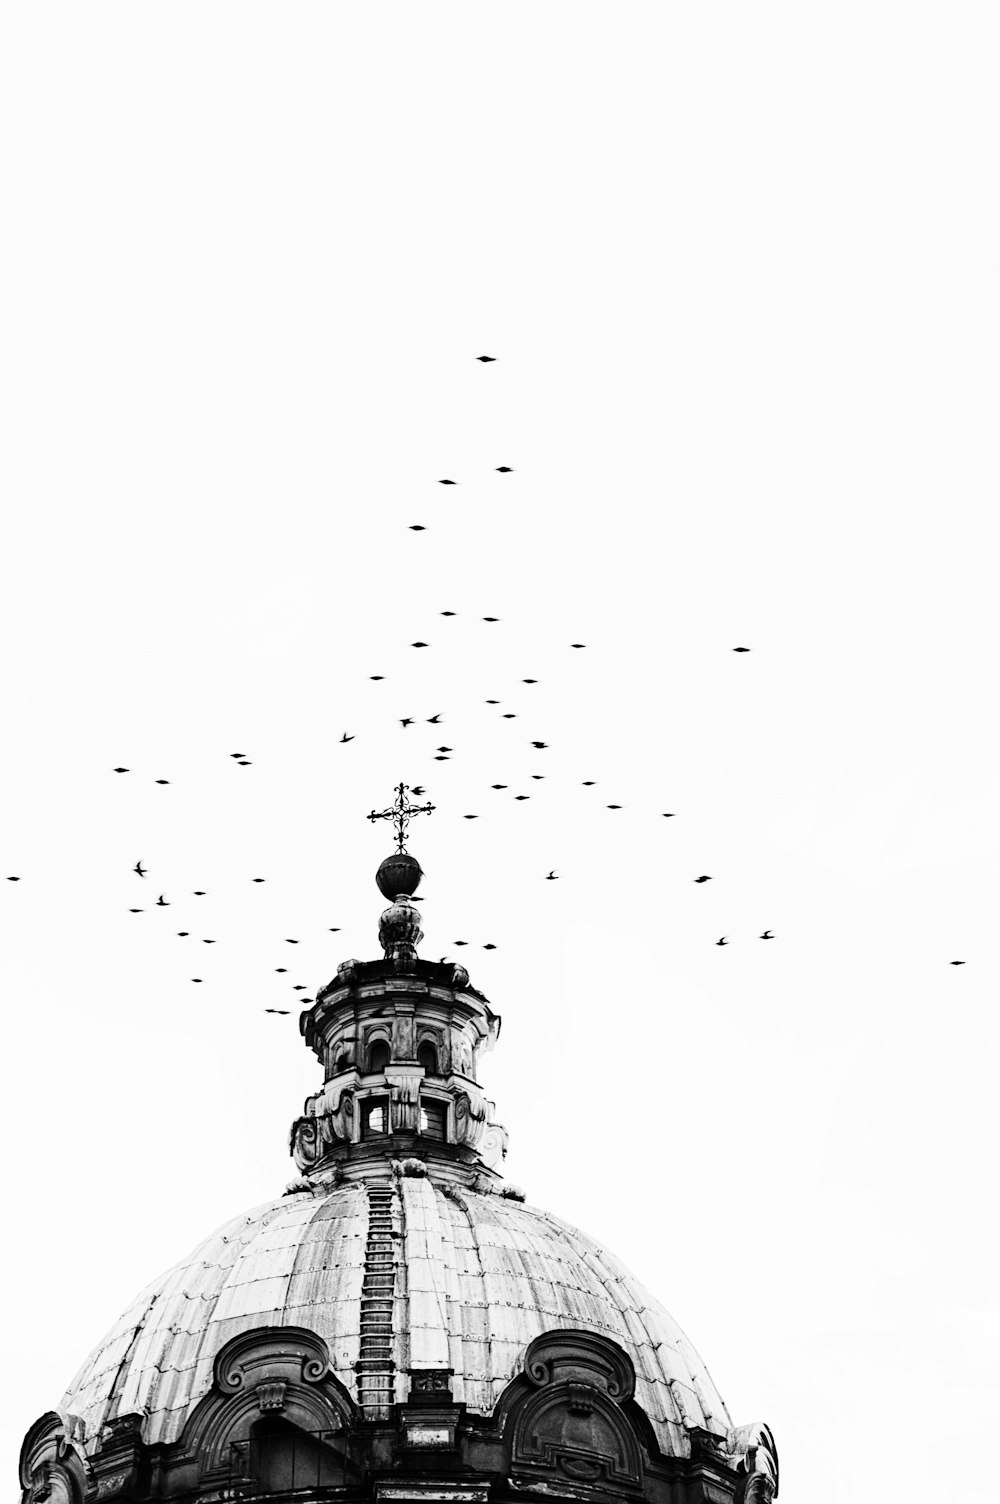 flock of birds flying over the building